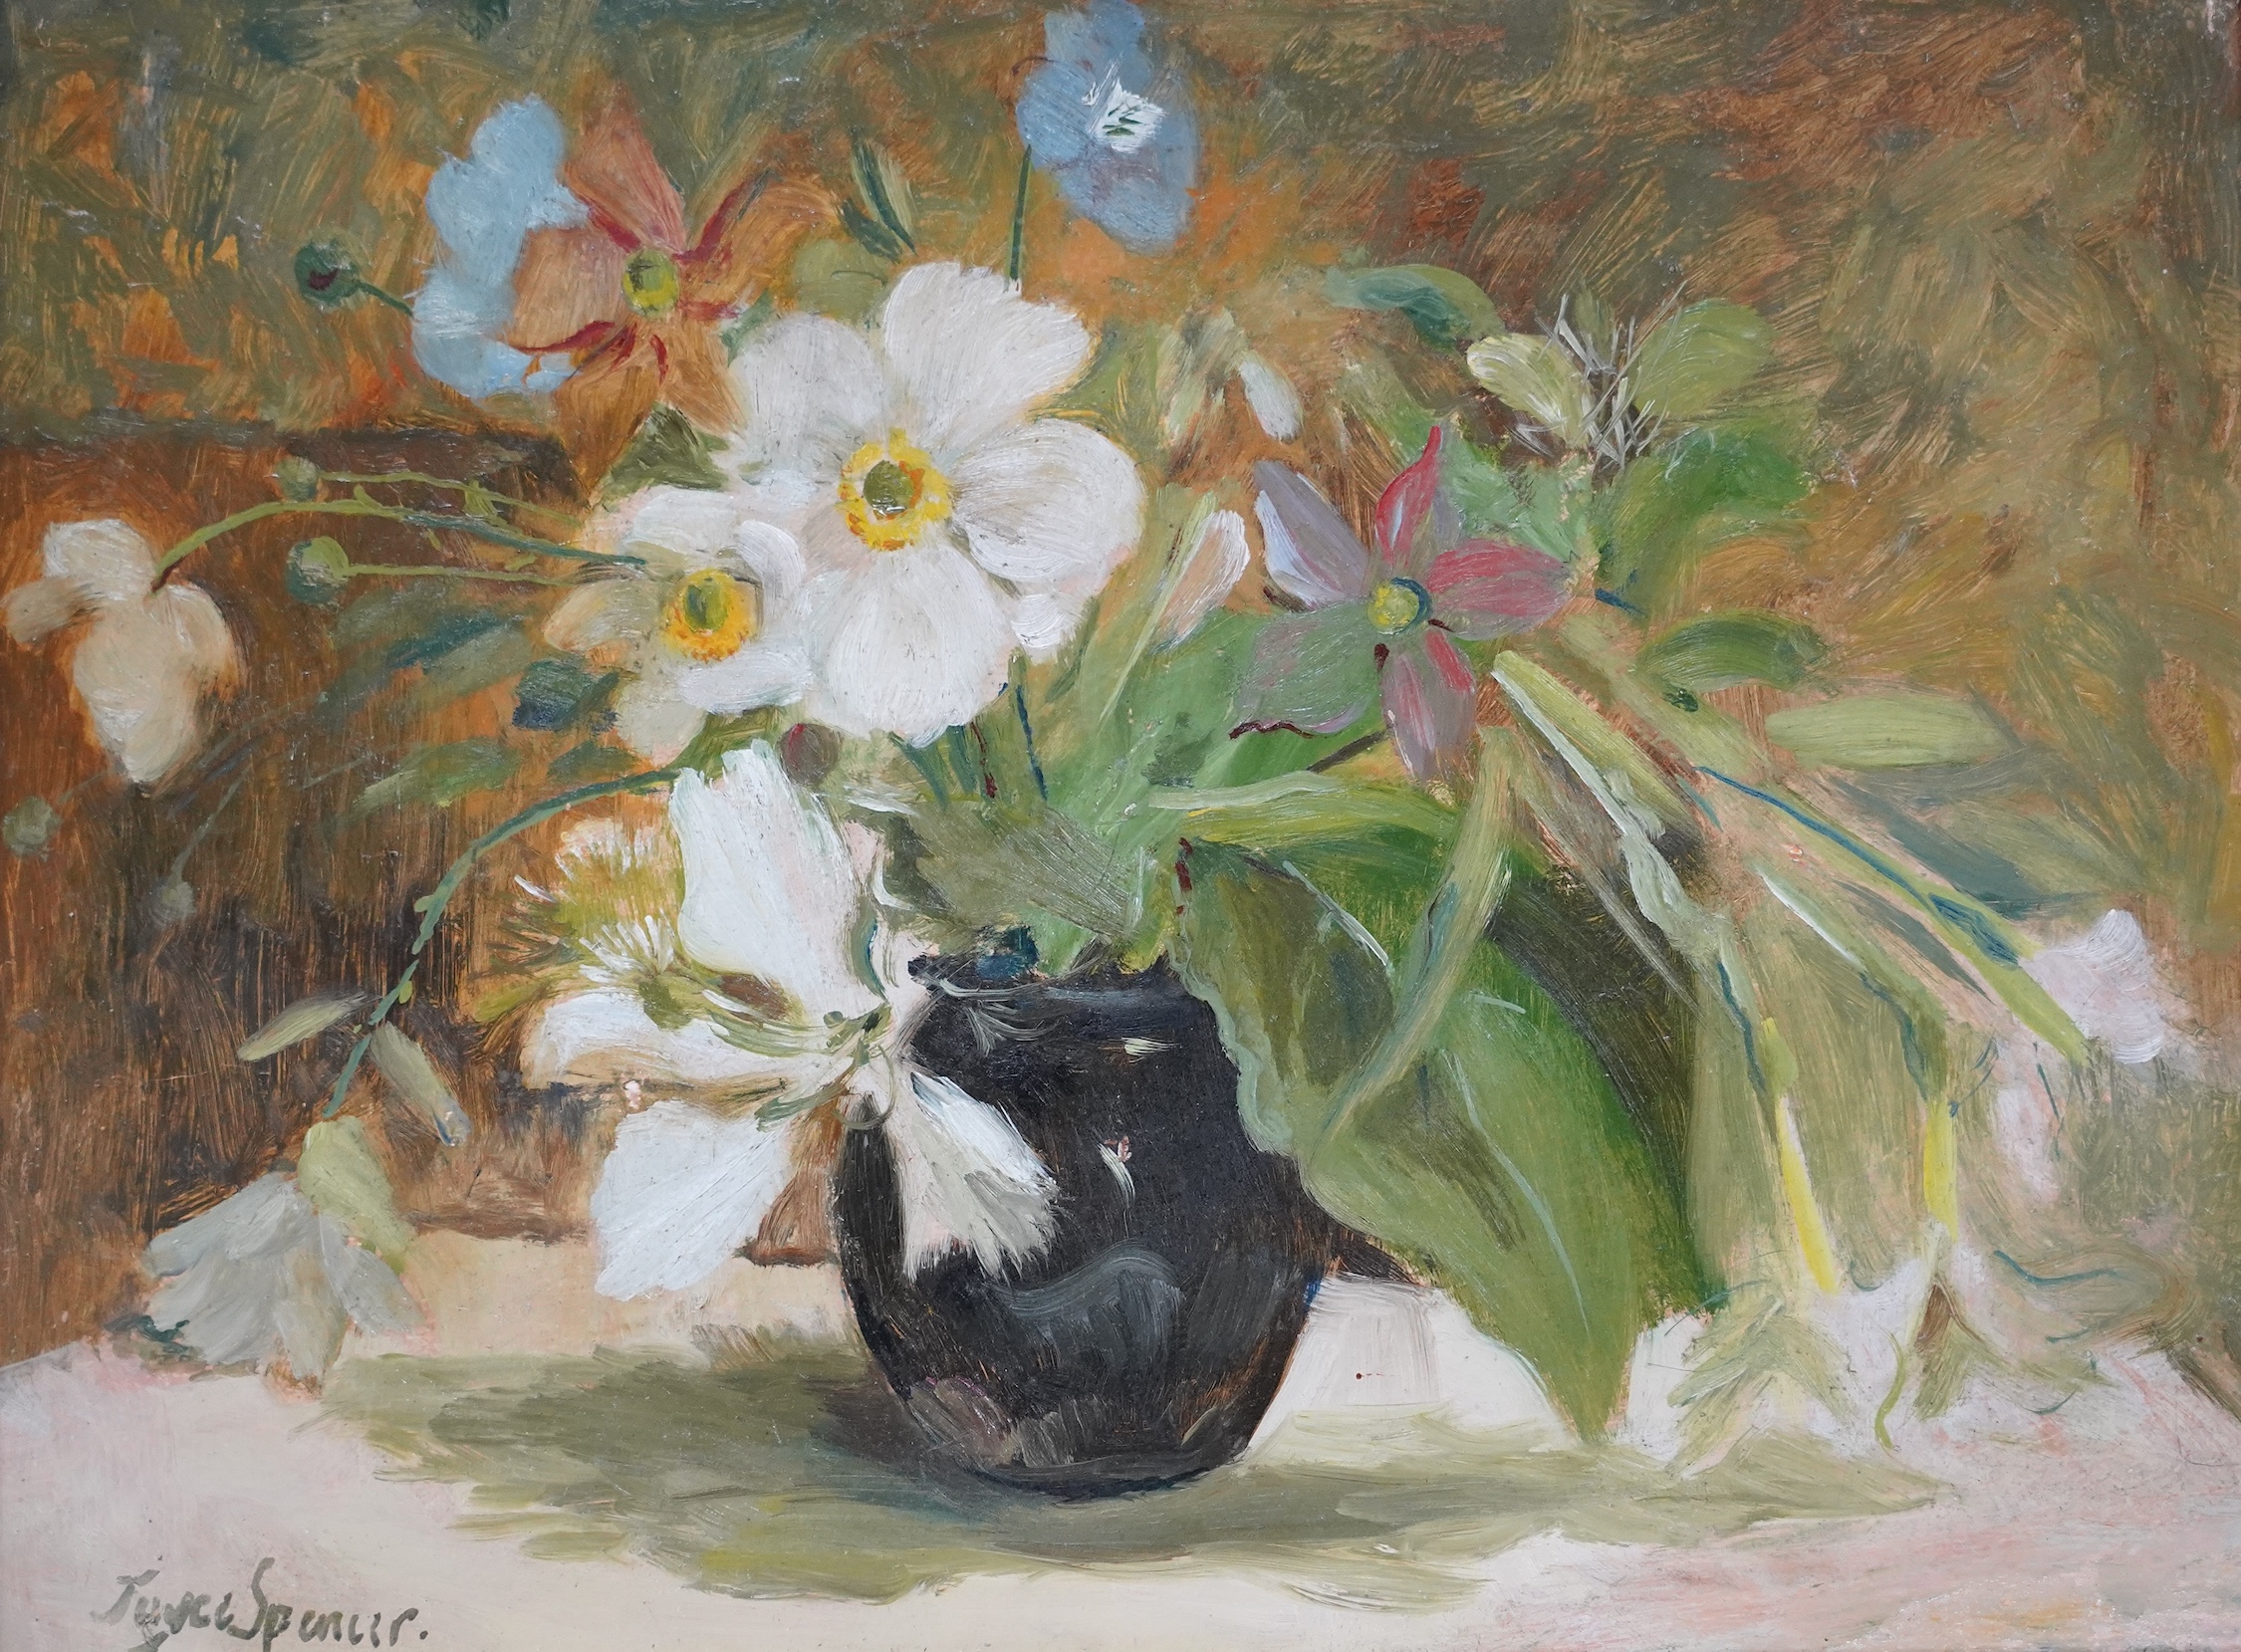 Joyce Spencer (b.1923), oil on board, Still life of flowers in a vase, c.1950, signed, inscribed label verso, 28 x 37cm